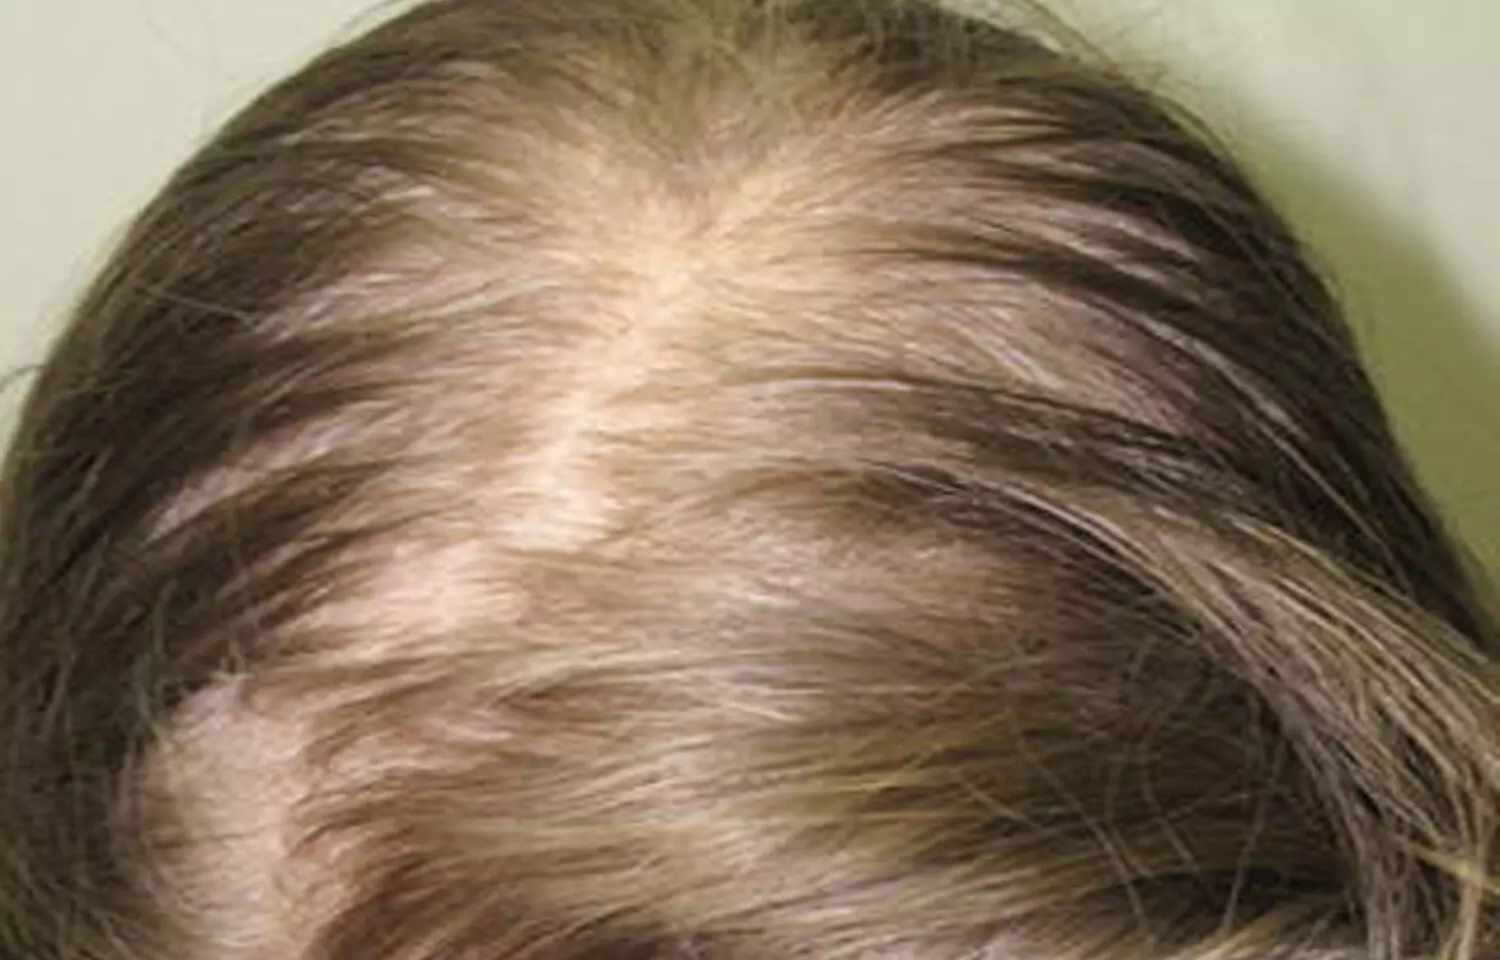 Oral minoxidil and spironolactone combo effective in alopecia in females:  Study